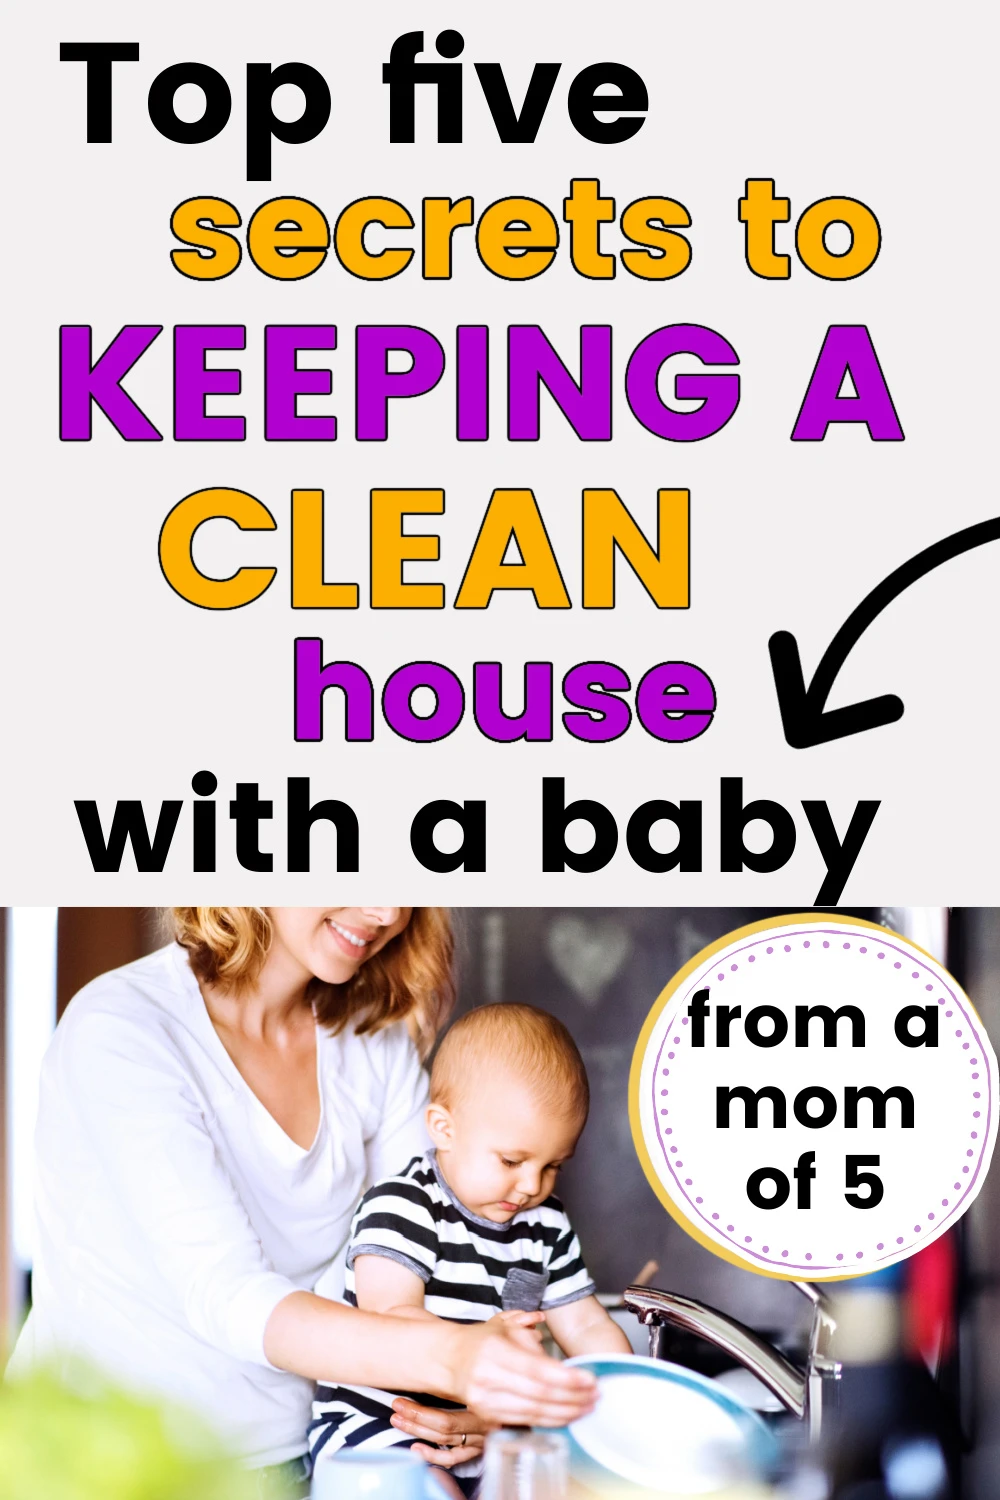 mom doing housework and dishes with text overlay "top five secrets to keeping a clean house with a baby"